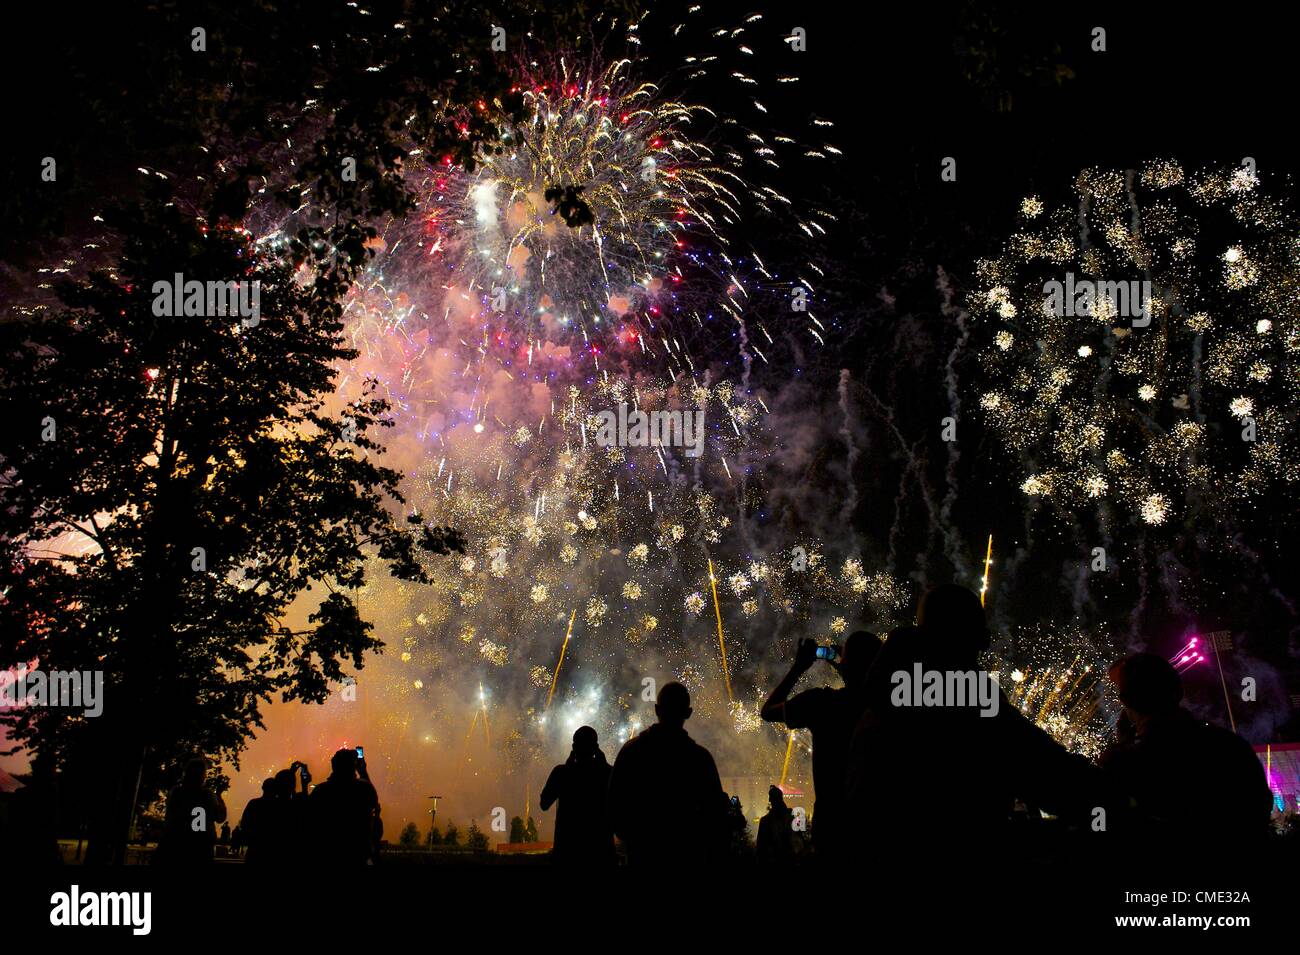 July 27, 2012 - London, England, UK - Dancers who performed in the 2012 London Summer Olympics observe a fireworks display outside the Olympic Stadium. (Credit Image: © Mark Makela/ZUMAPRESS.com) Stock Photo